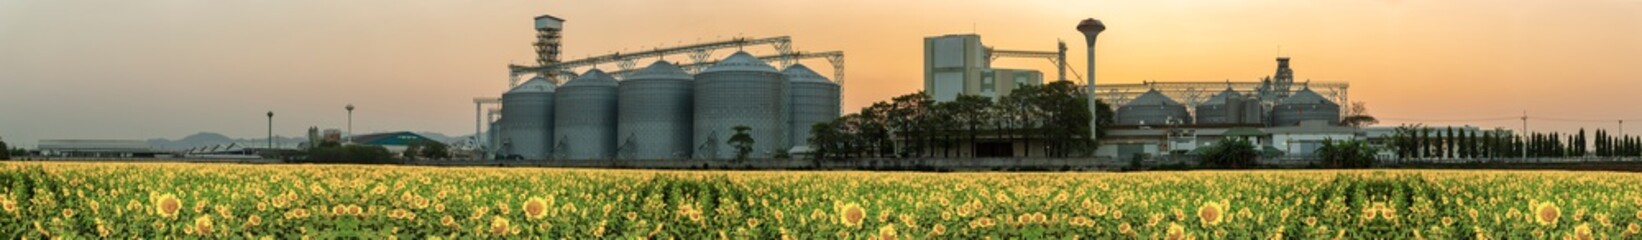 Agricultural Silos - Building Exterior, Storage and drying of grains, wheat, corn, soy, sunflower against the blue sky with sunflower fields.